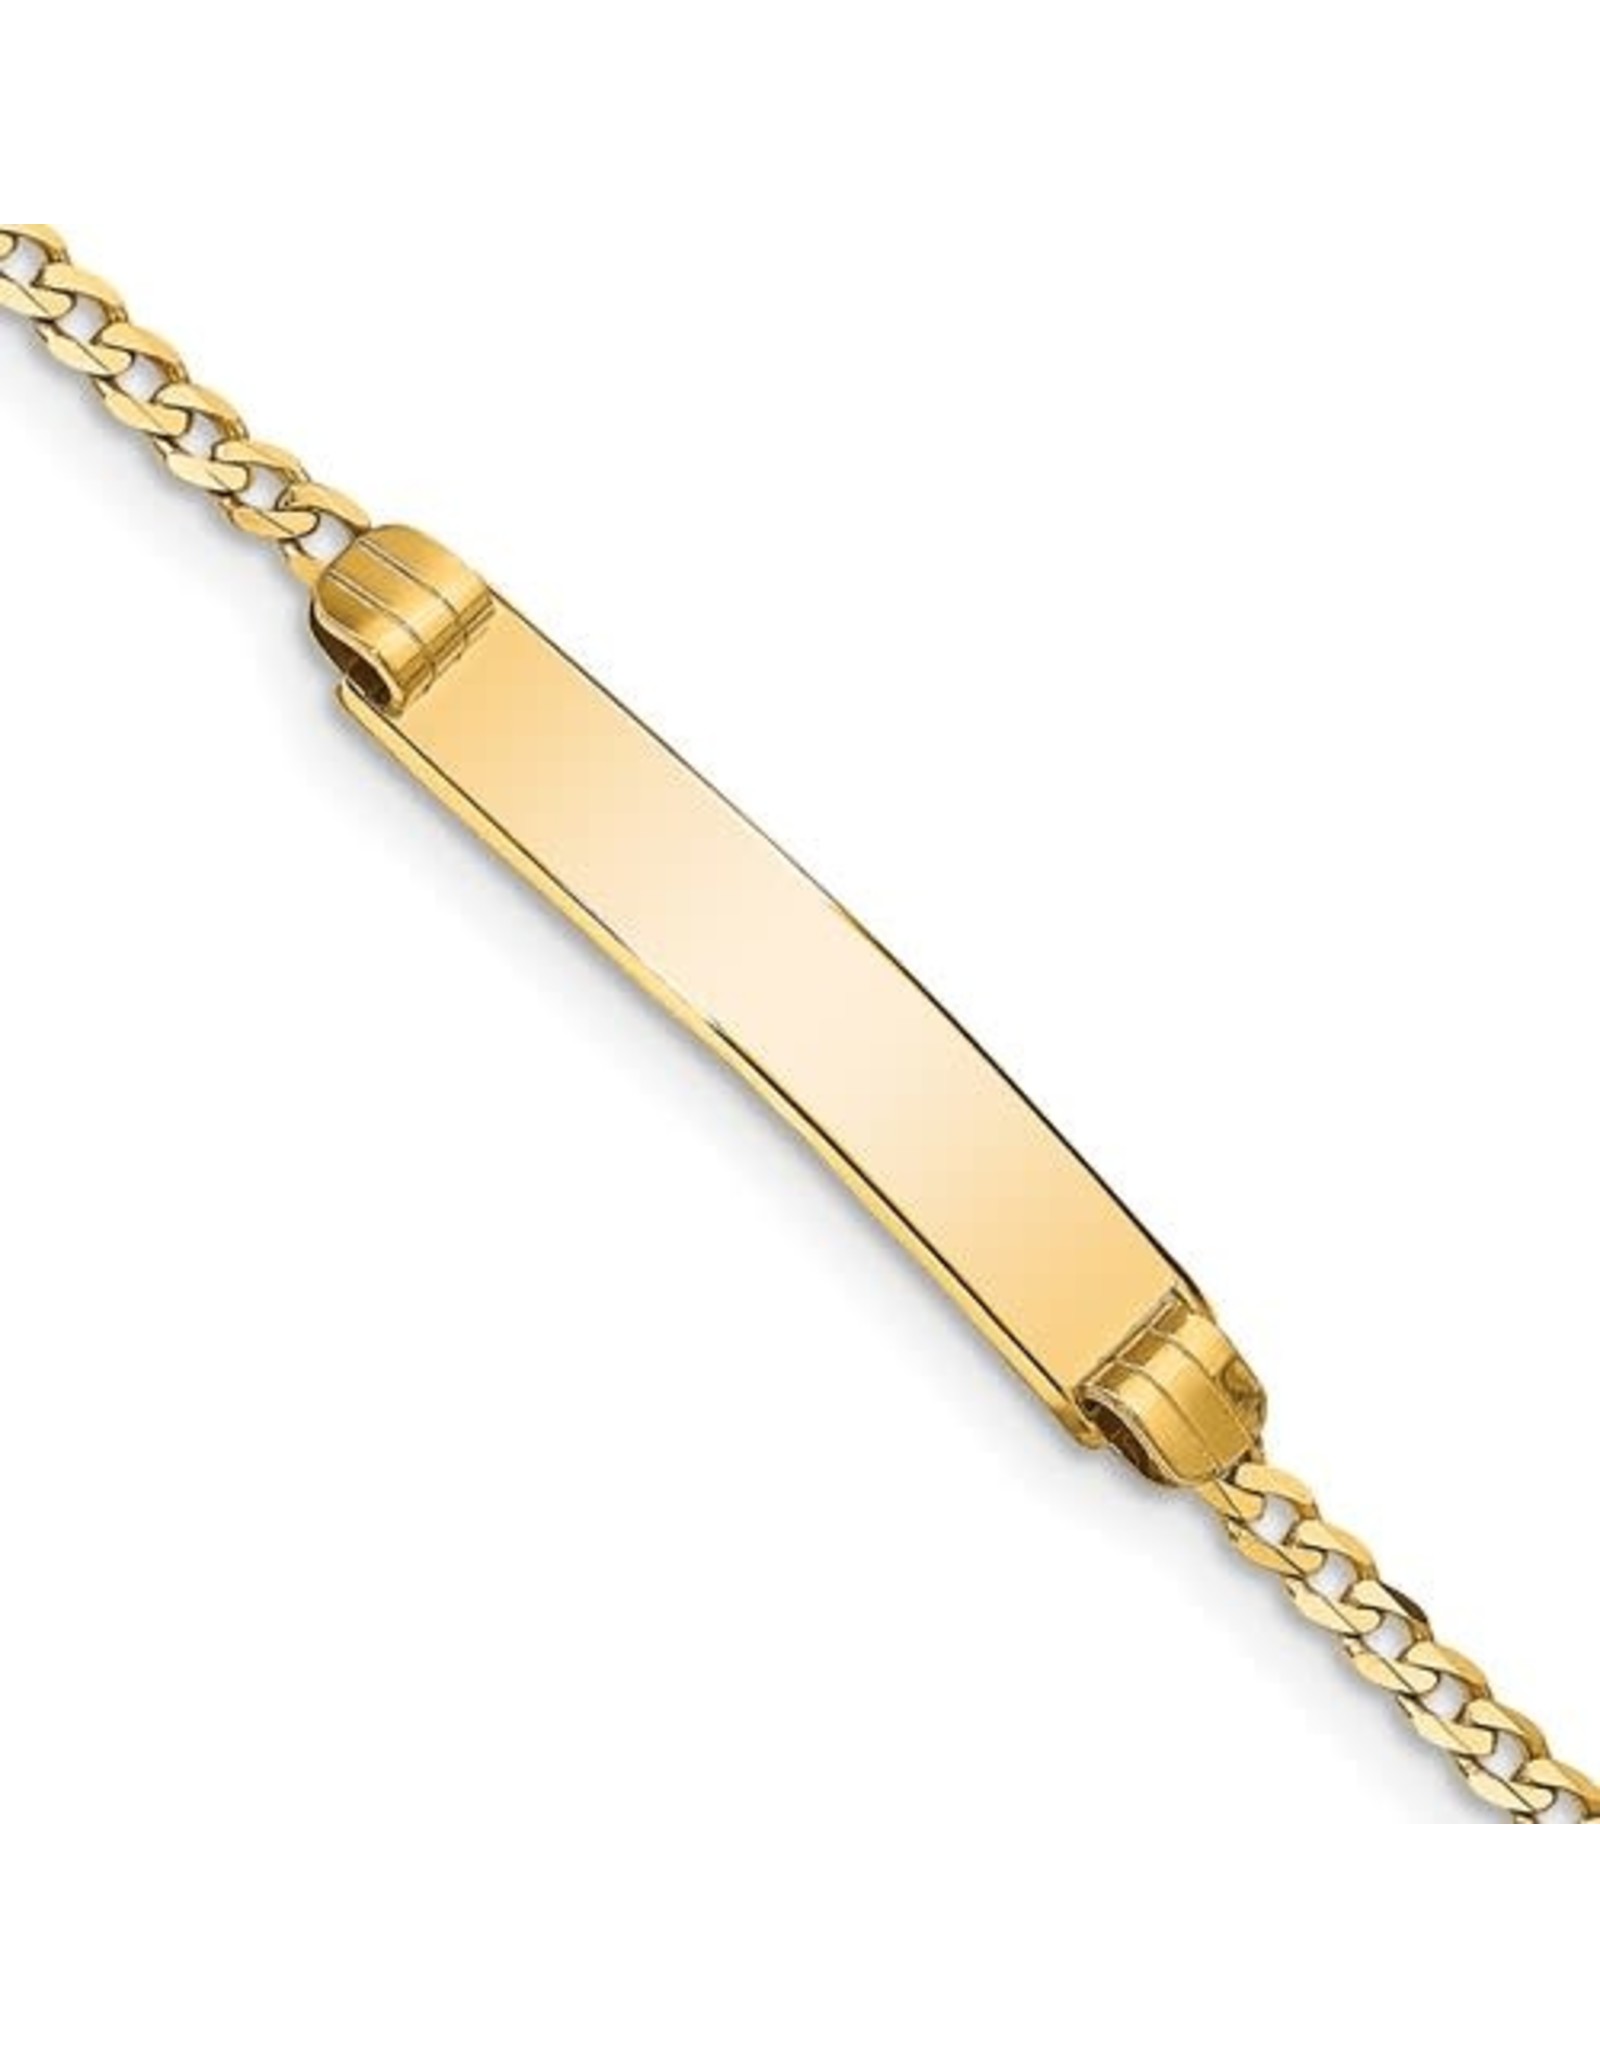 14K Yellow Gold Curb Link Baby ID Bracelet, 5.5"